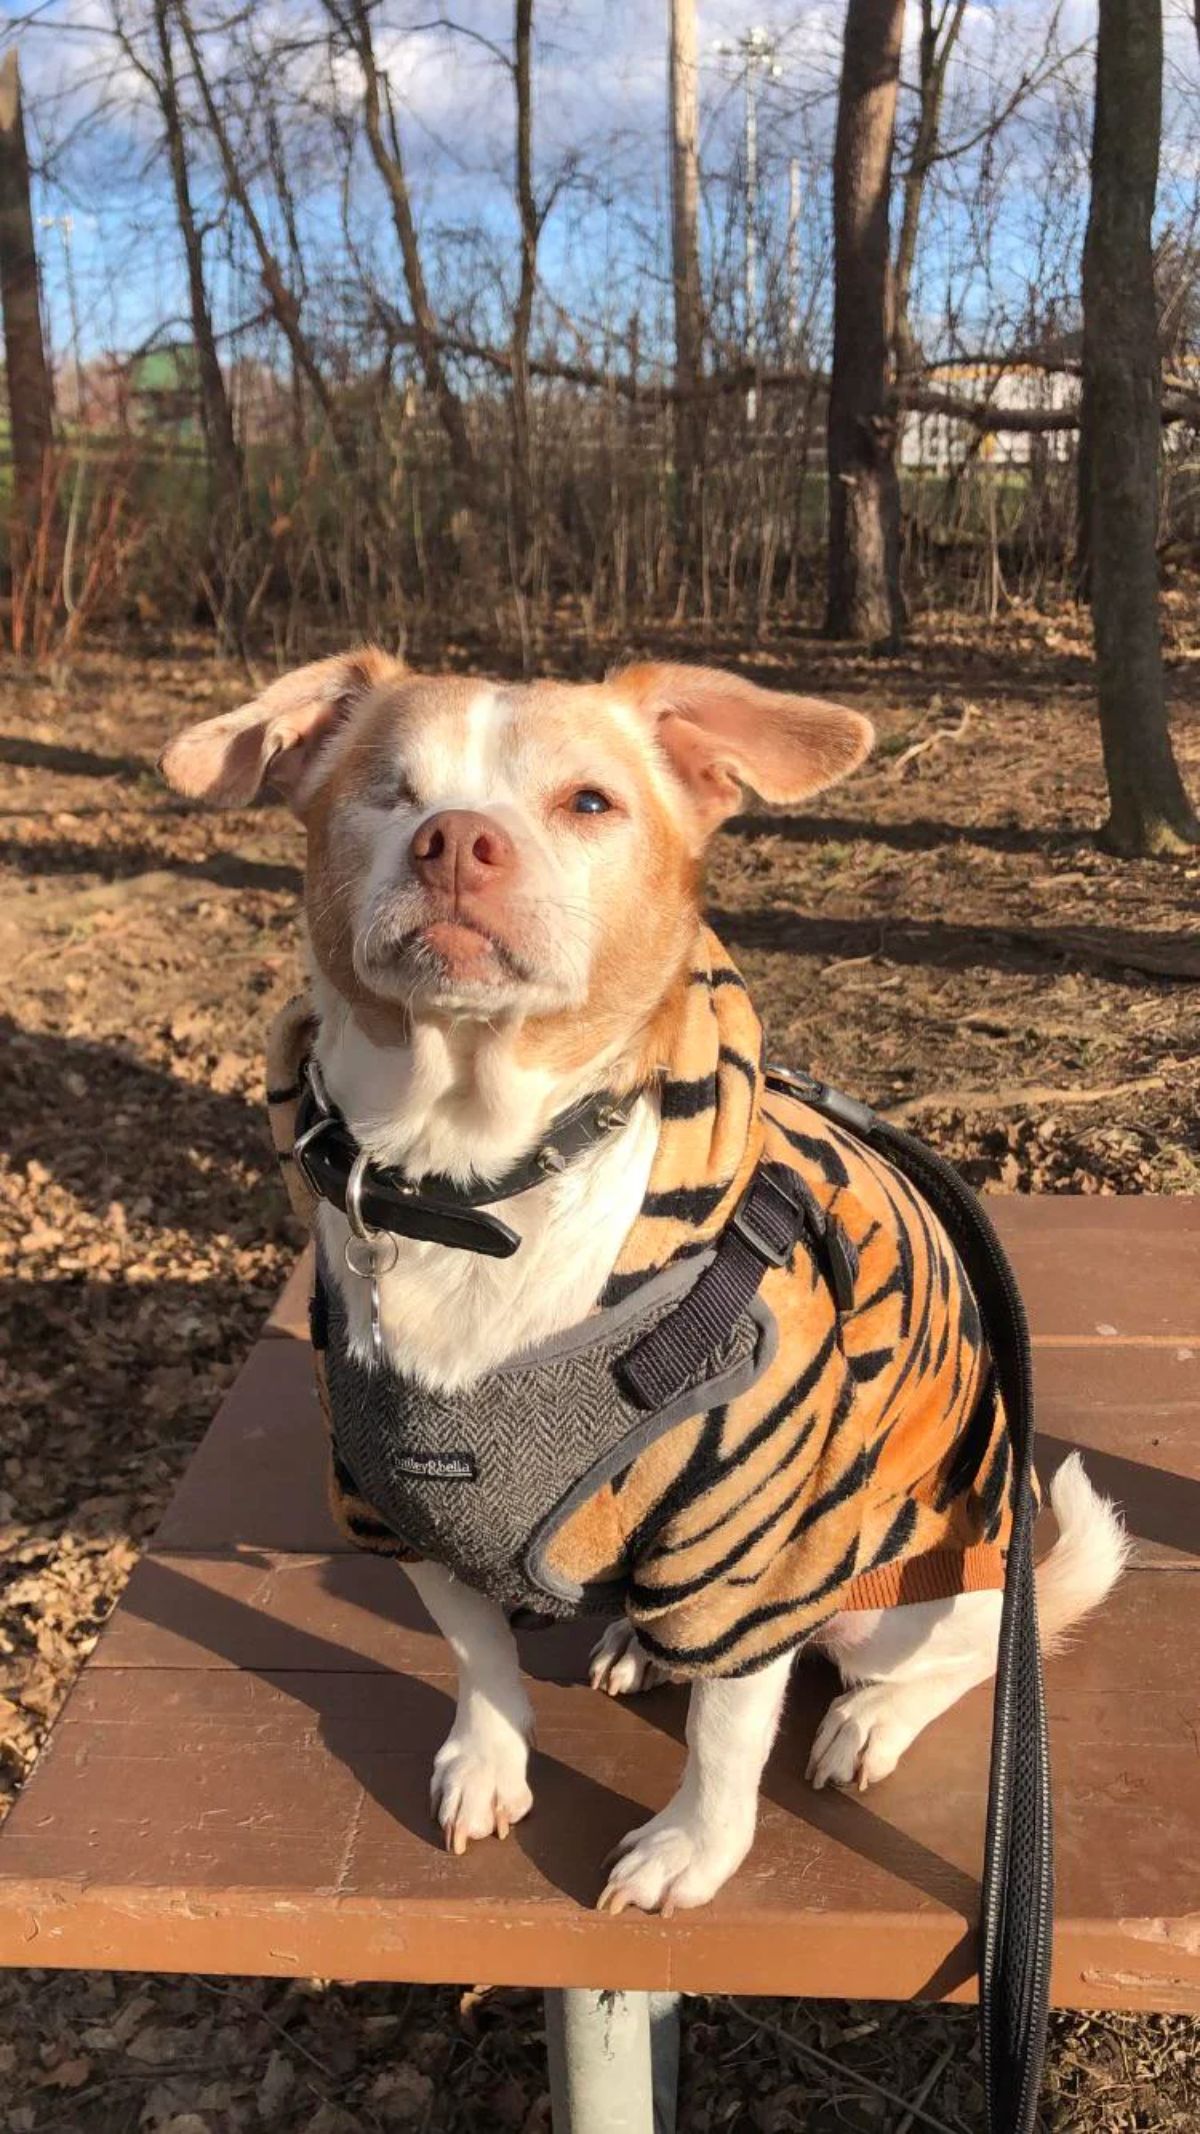 brown and white dog wearing an orange and black coat sitting on a bench